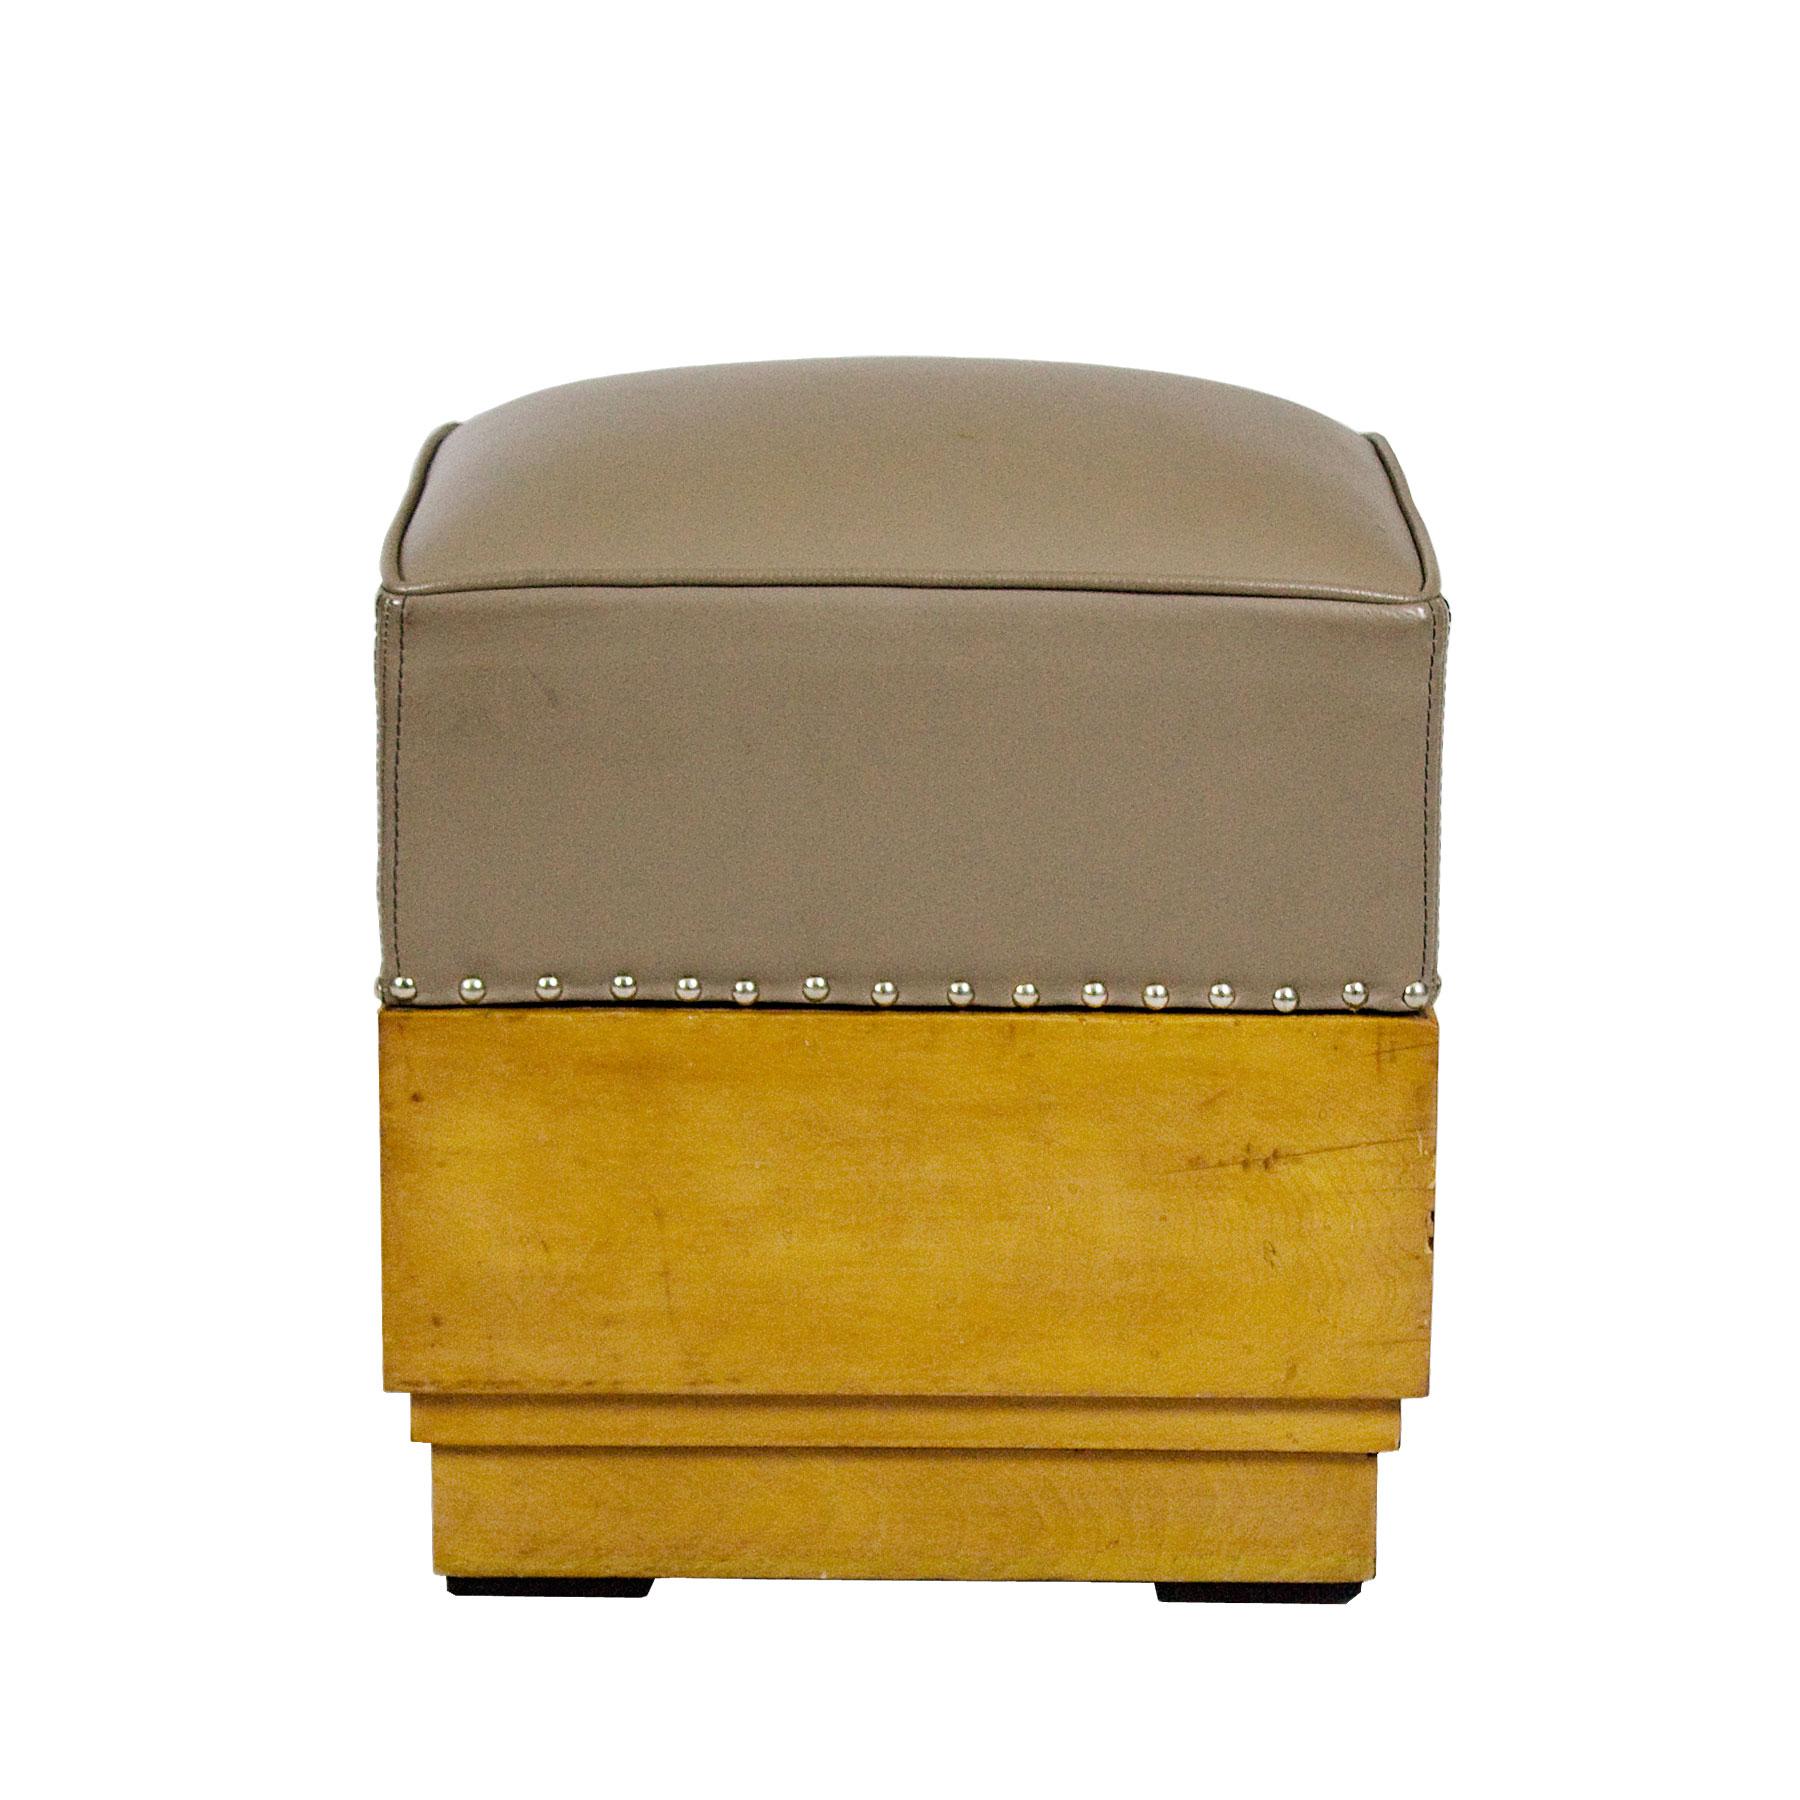 Cubist Art Deco pouffe in maple and taupe leather upholstery.

Spain, Barcelona circa 1930.